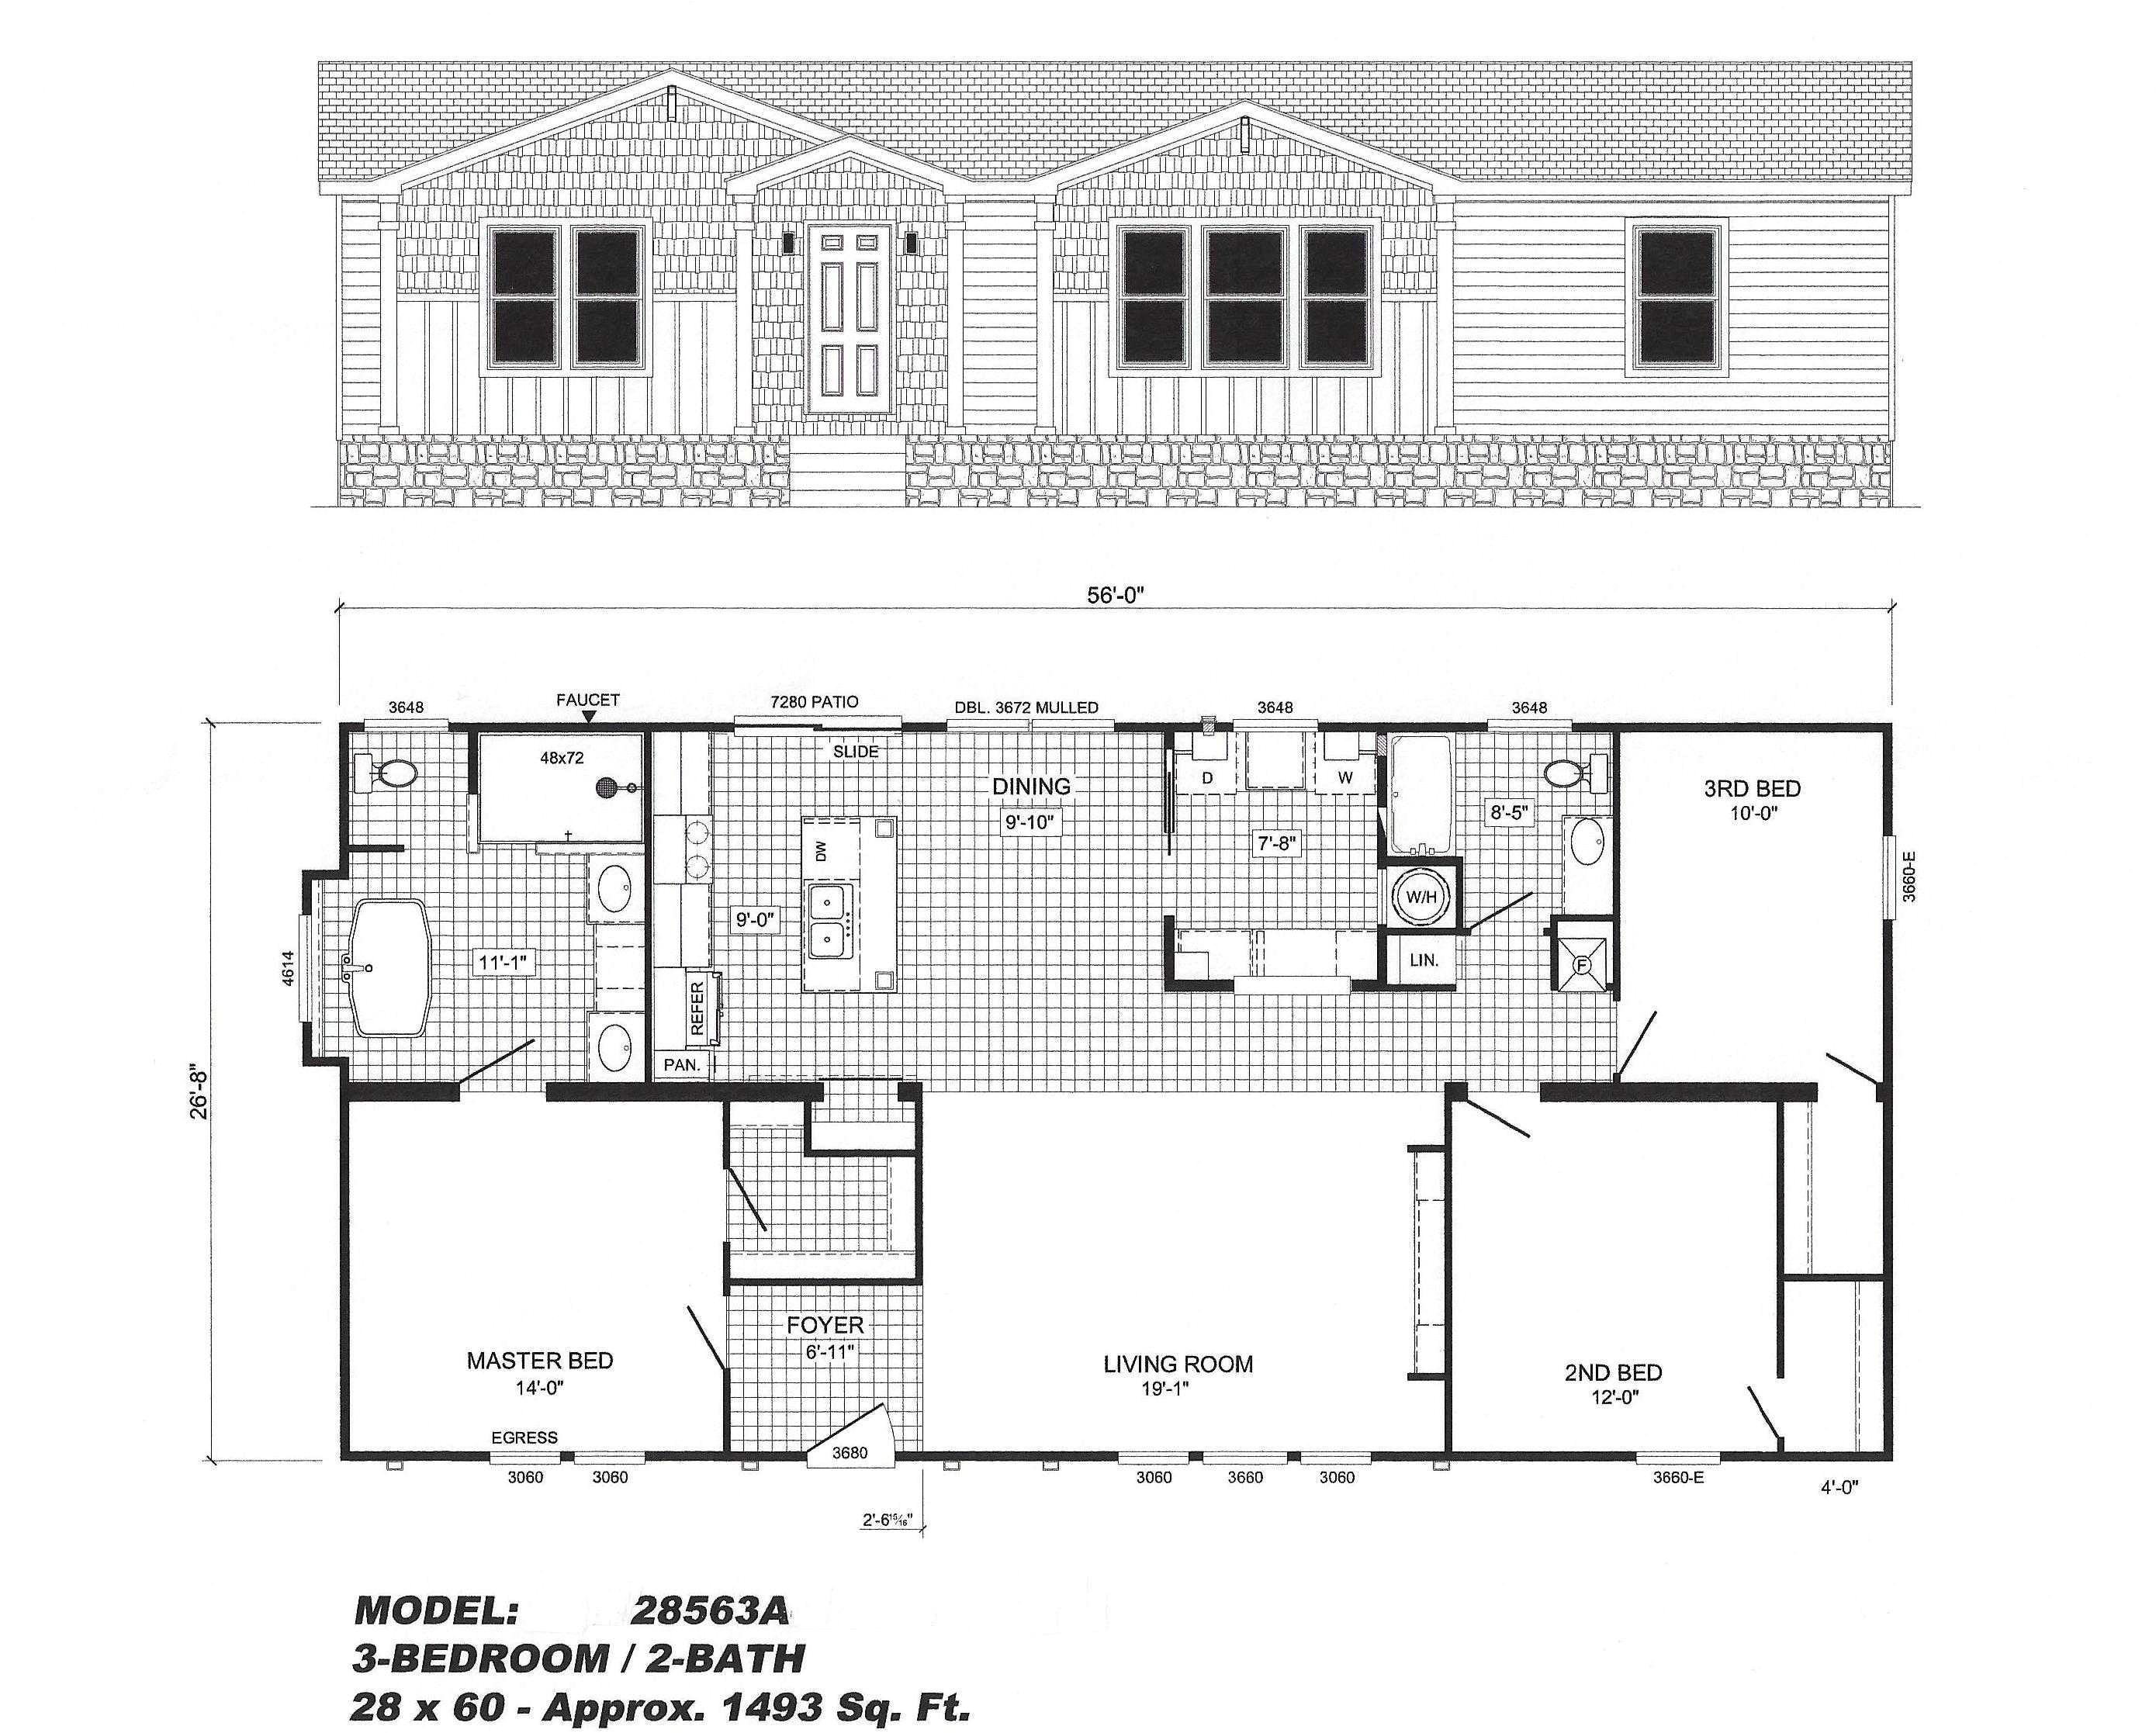 3 bedroom modular home floor plans pictures gallery also plan pat hawks homes and charming price 2018